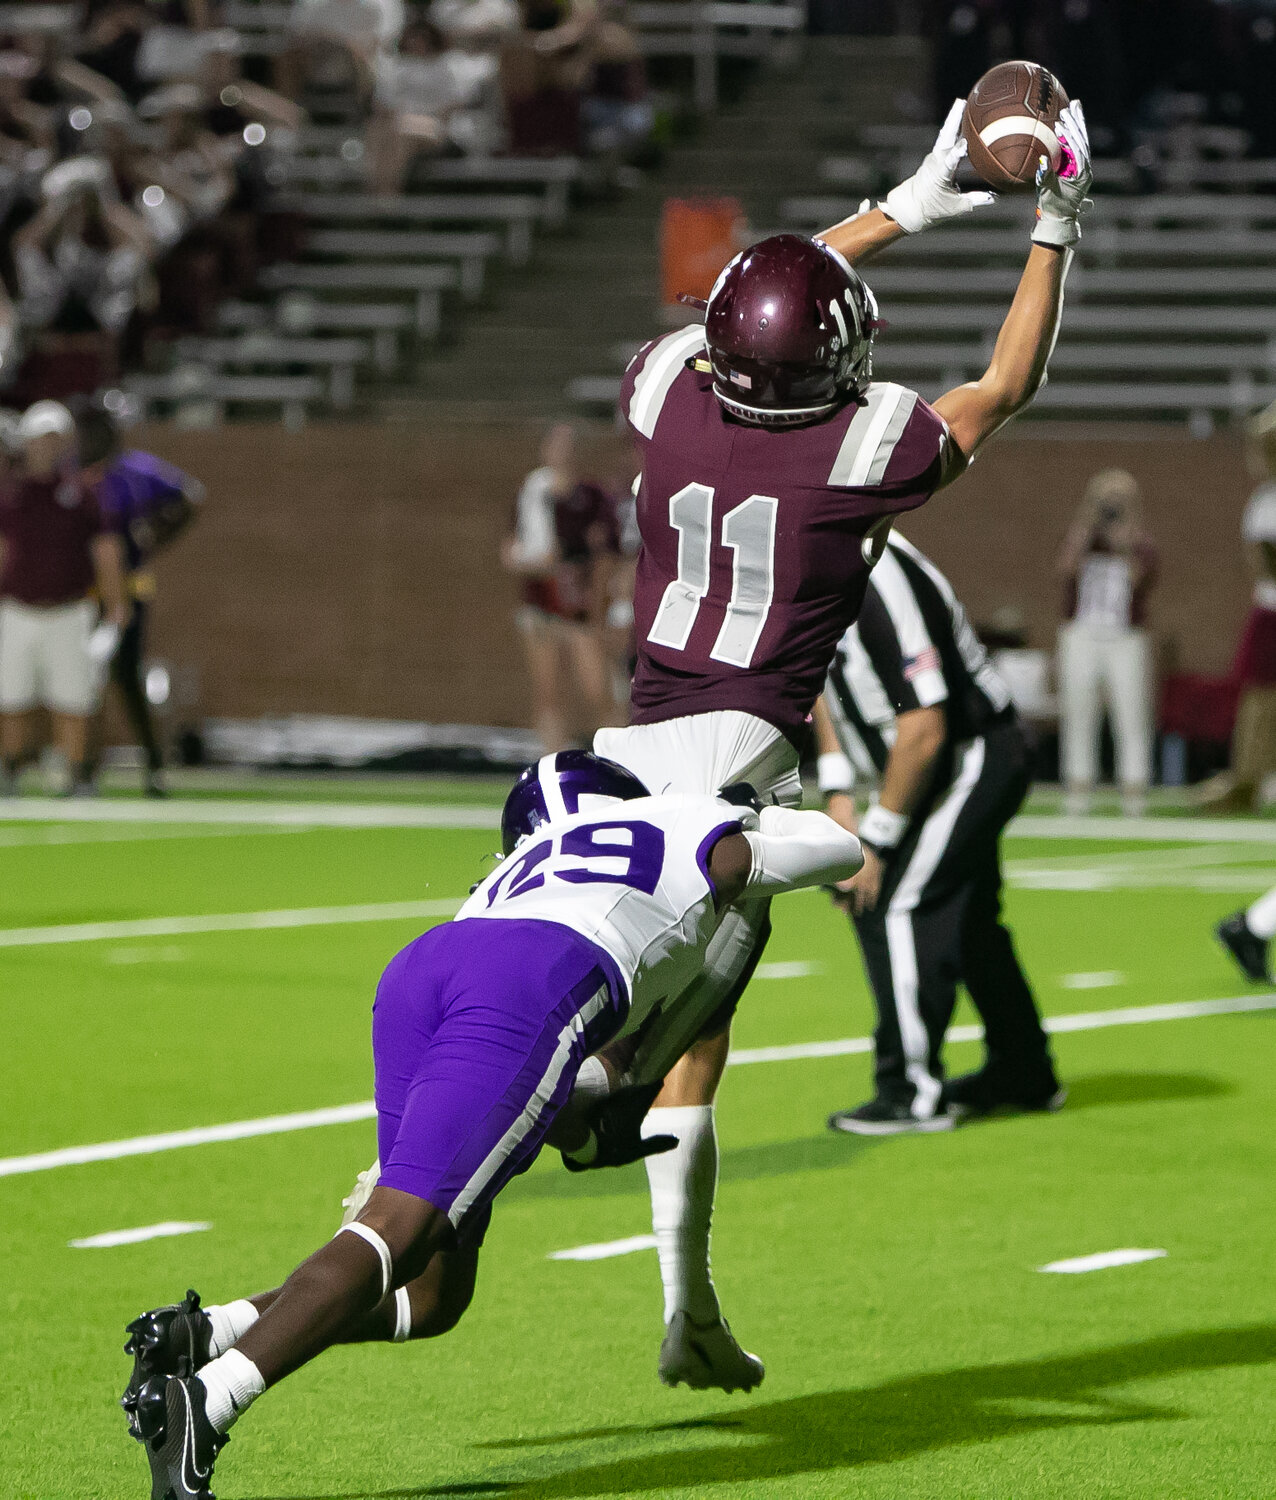 Gavin Beavers catches a pass during Friday's District 19-6A game between Cinco Ranch and Morton Ranch on Friday at Rhodes Stadium.